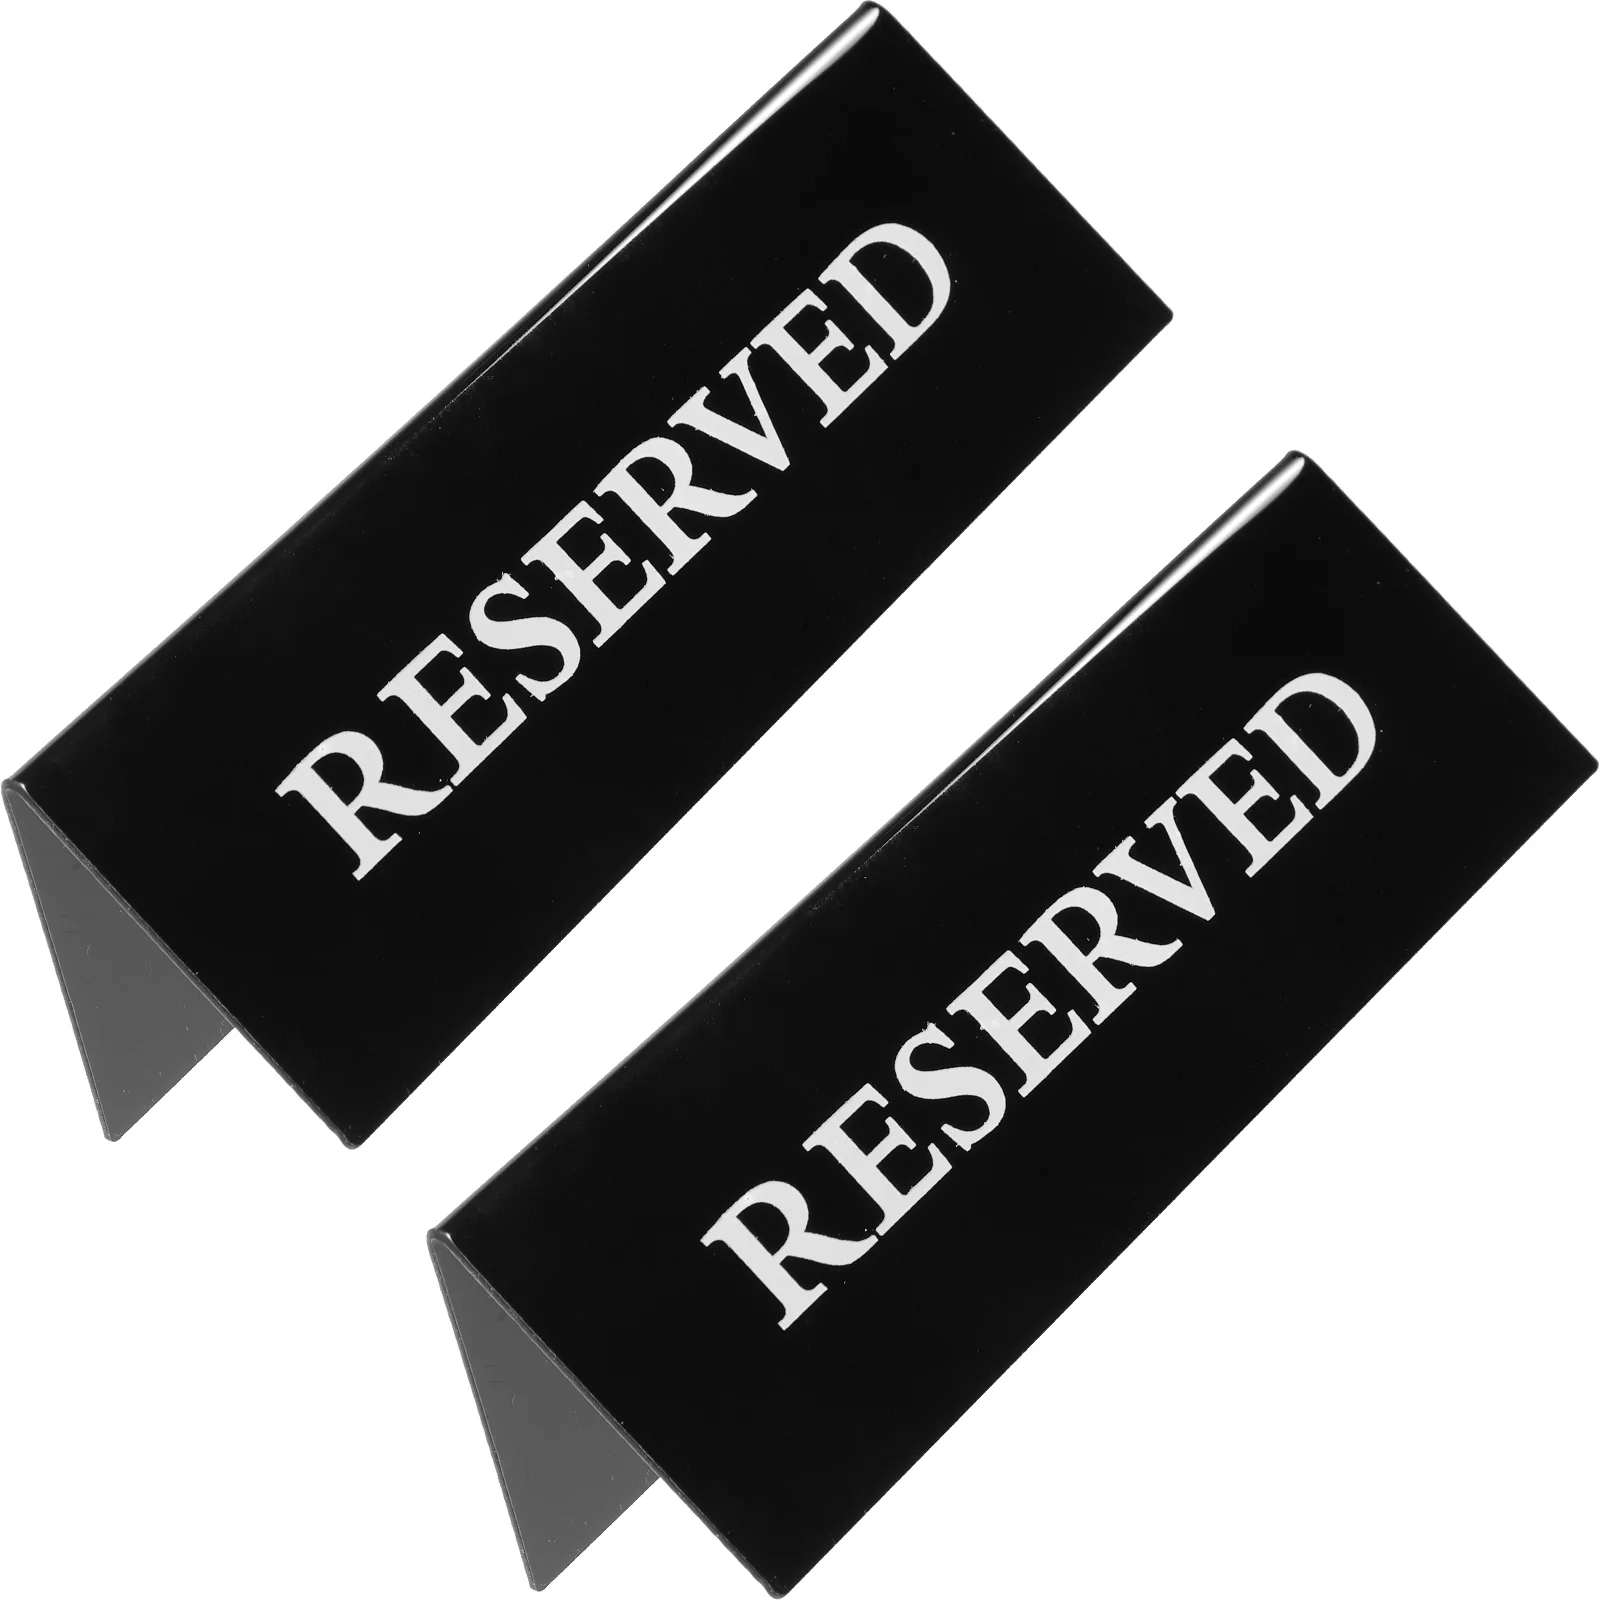 Reserved Signs Sign Table Acrylic Reservation Wedding Card Seating Place Tent Restaurant Room Chair Guest Name Desk Conference v shaped acryliccard triangle bable conference double sided transparent guest card table sign tabletop seat